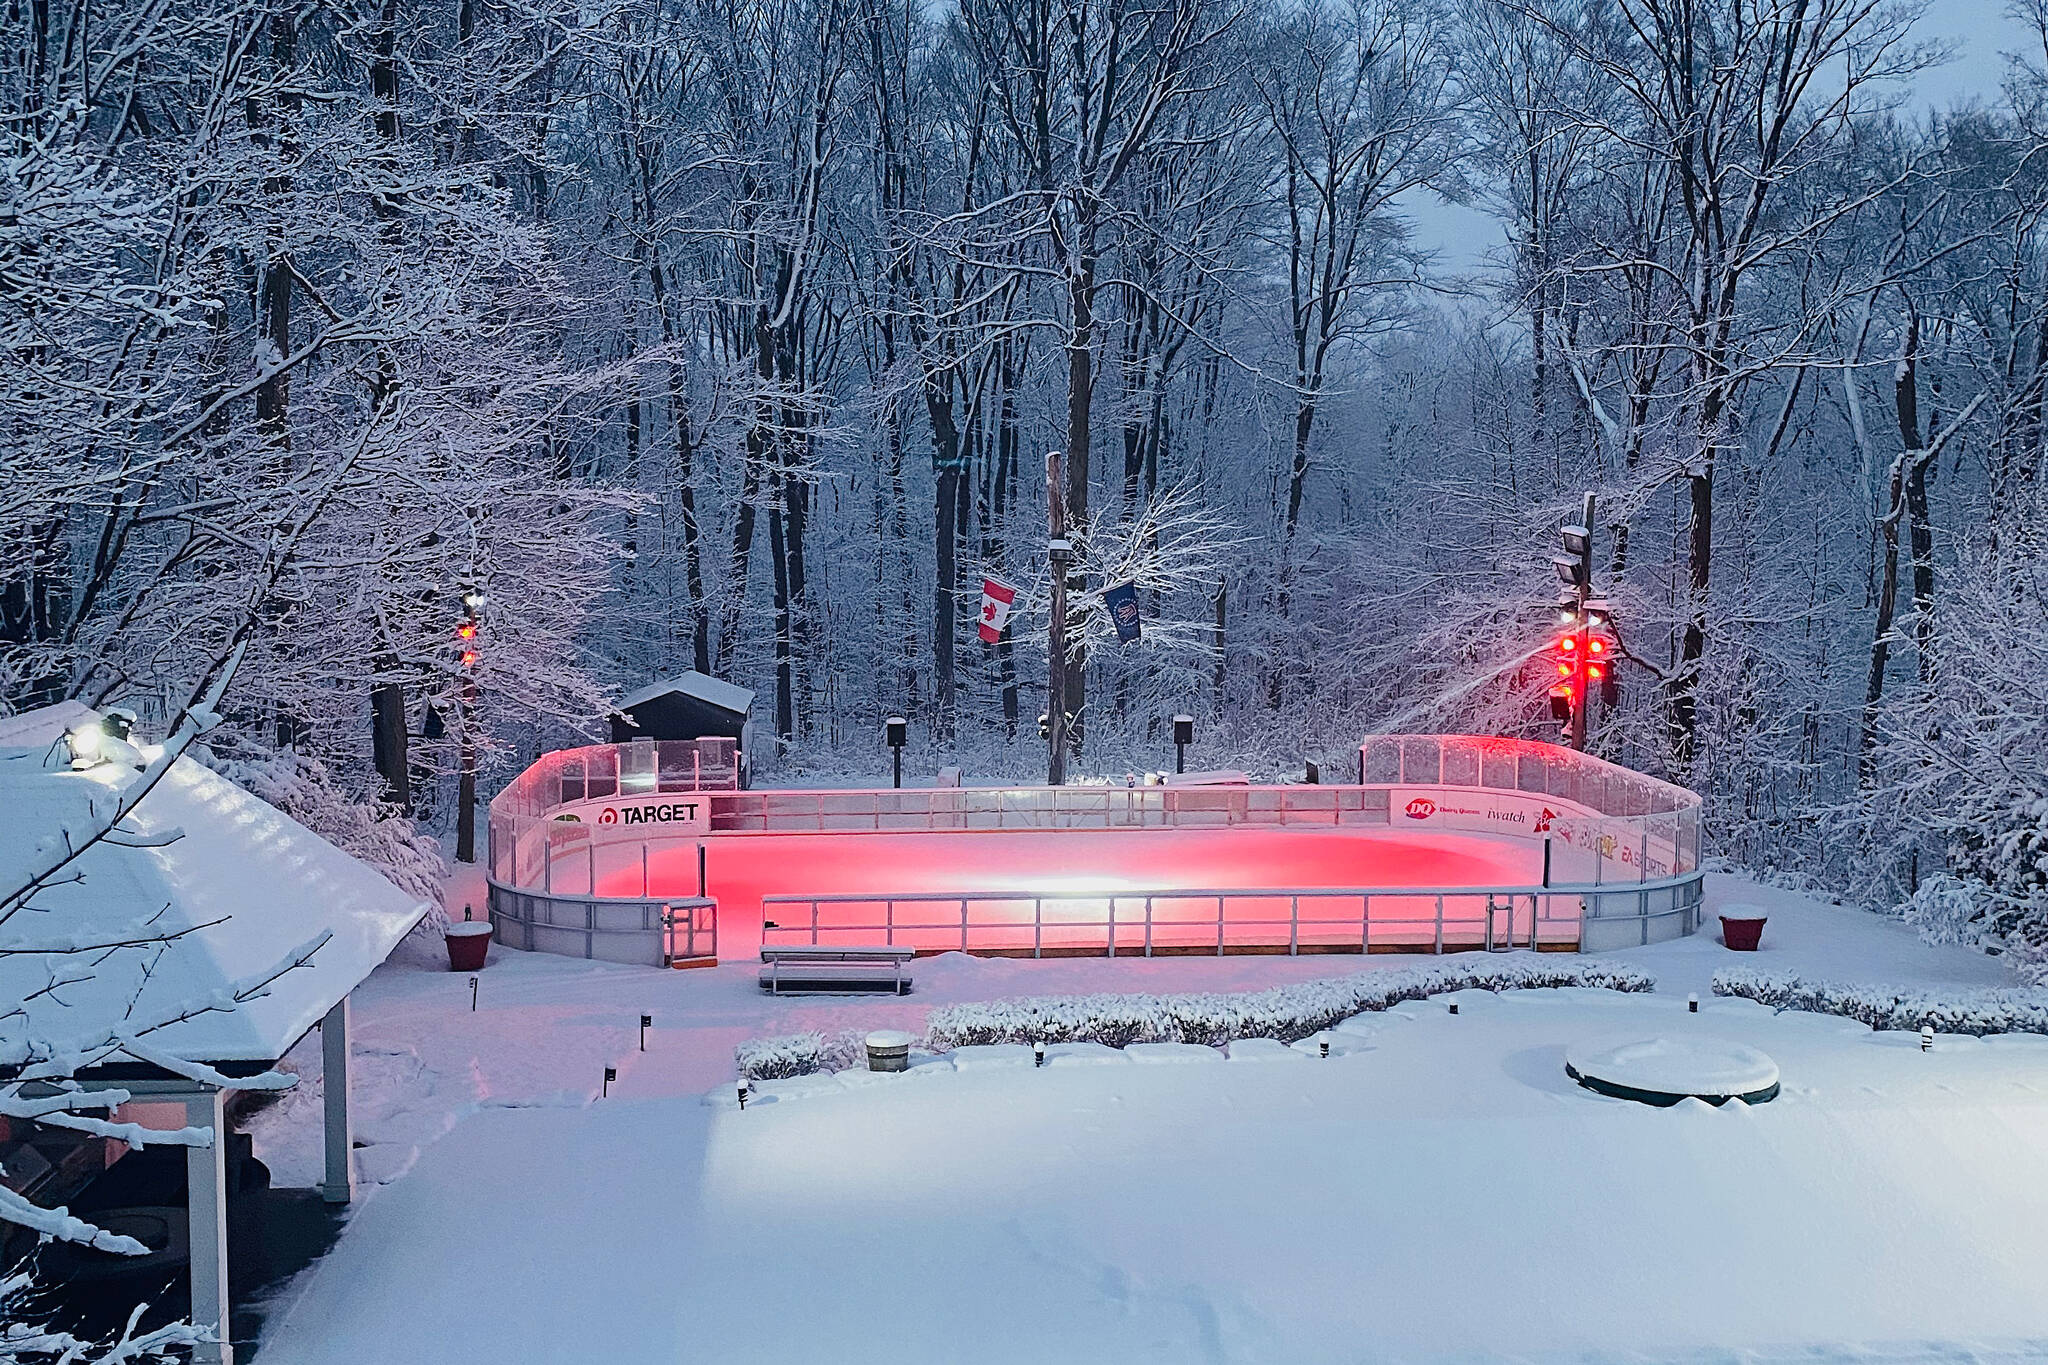 This might be the most overthetop backyard skating rink in Toronto